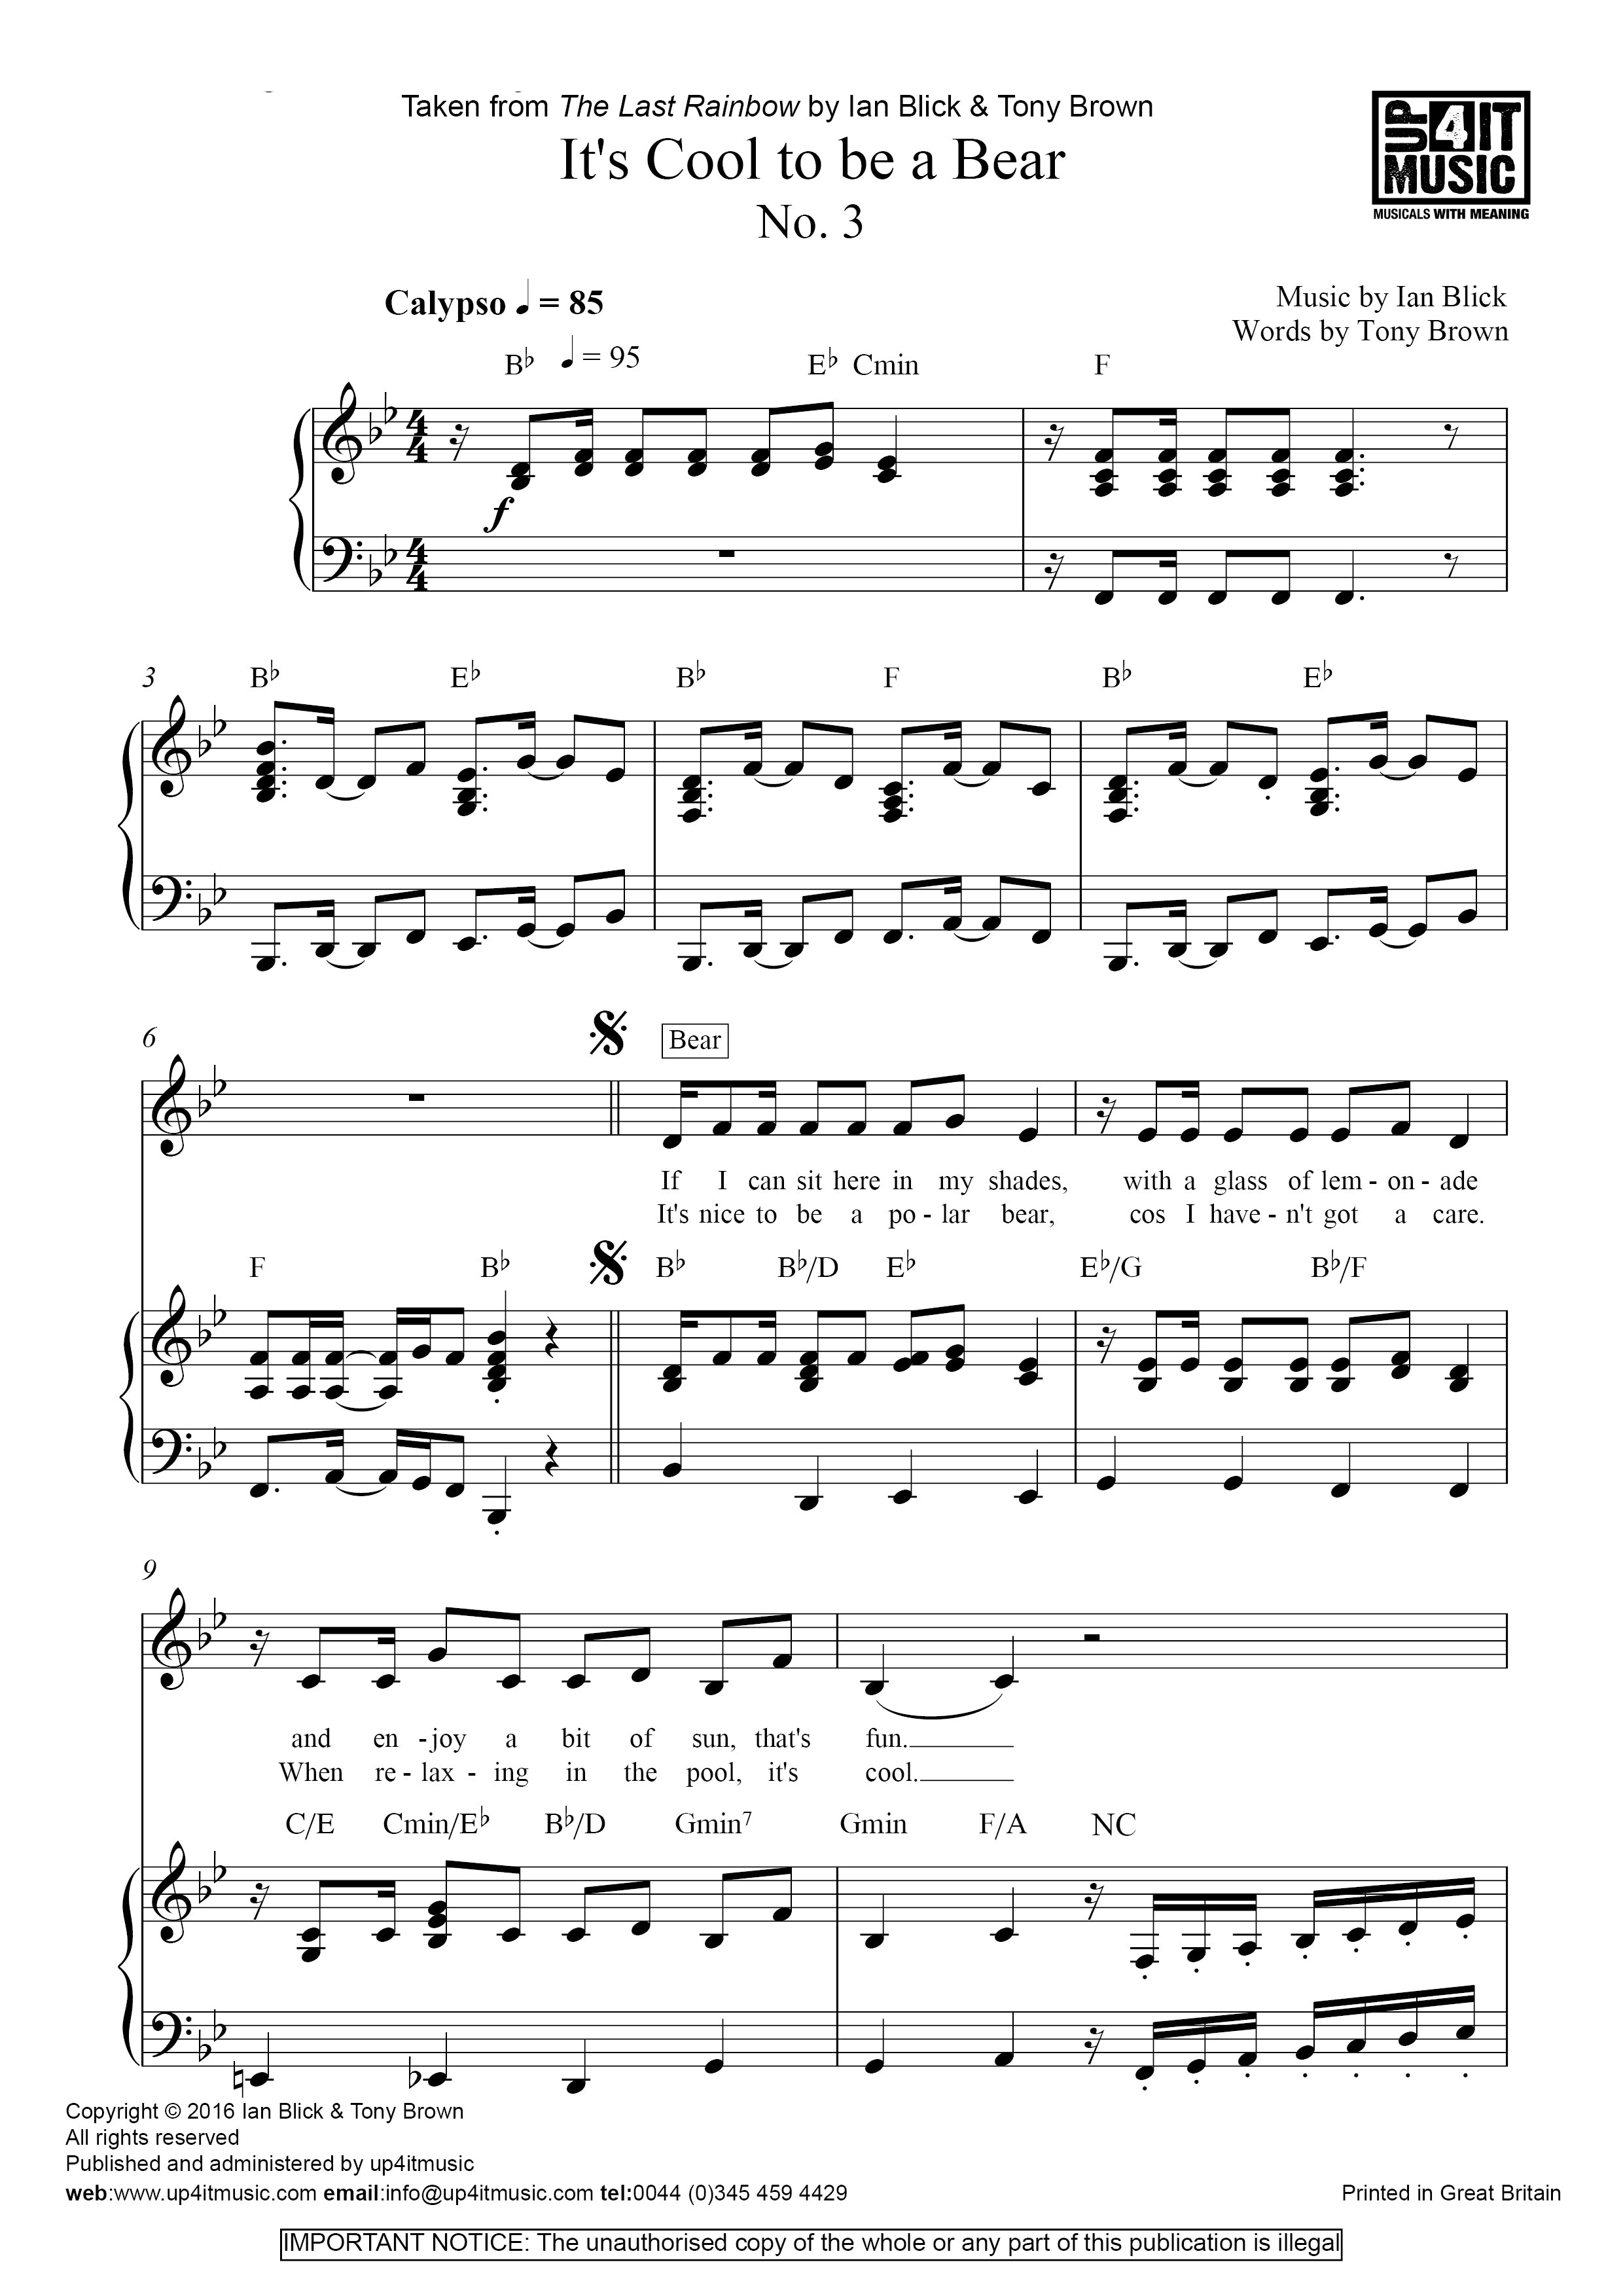 Bully, Bully - Words, Piano Score and MP3. Free Download